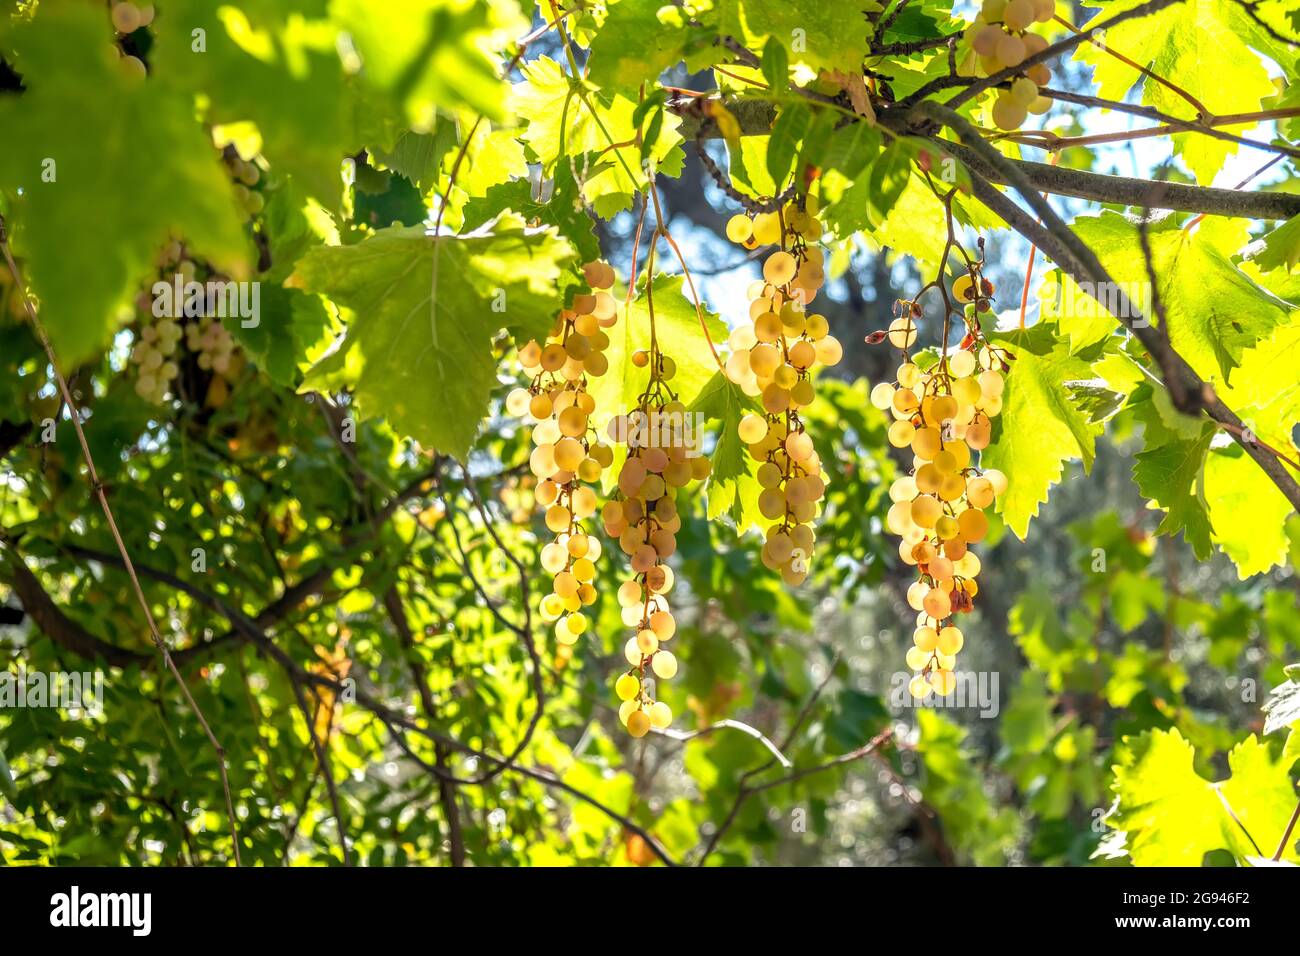 ripe bunches of grapes, raw material for making wine. Stock Photo